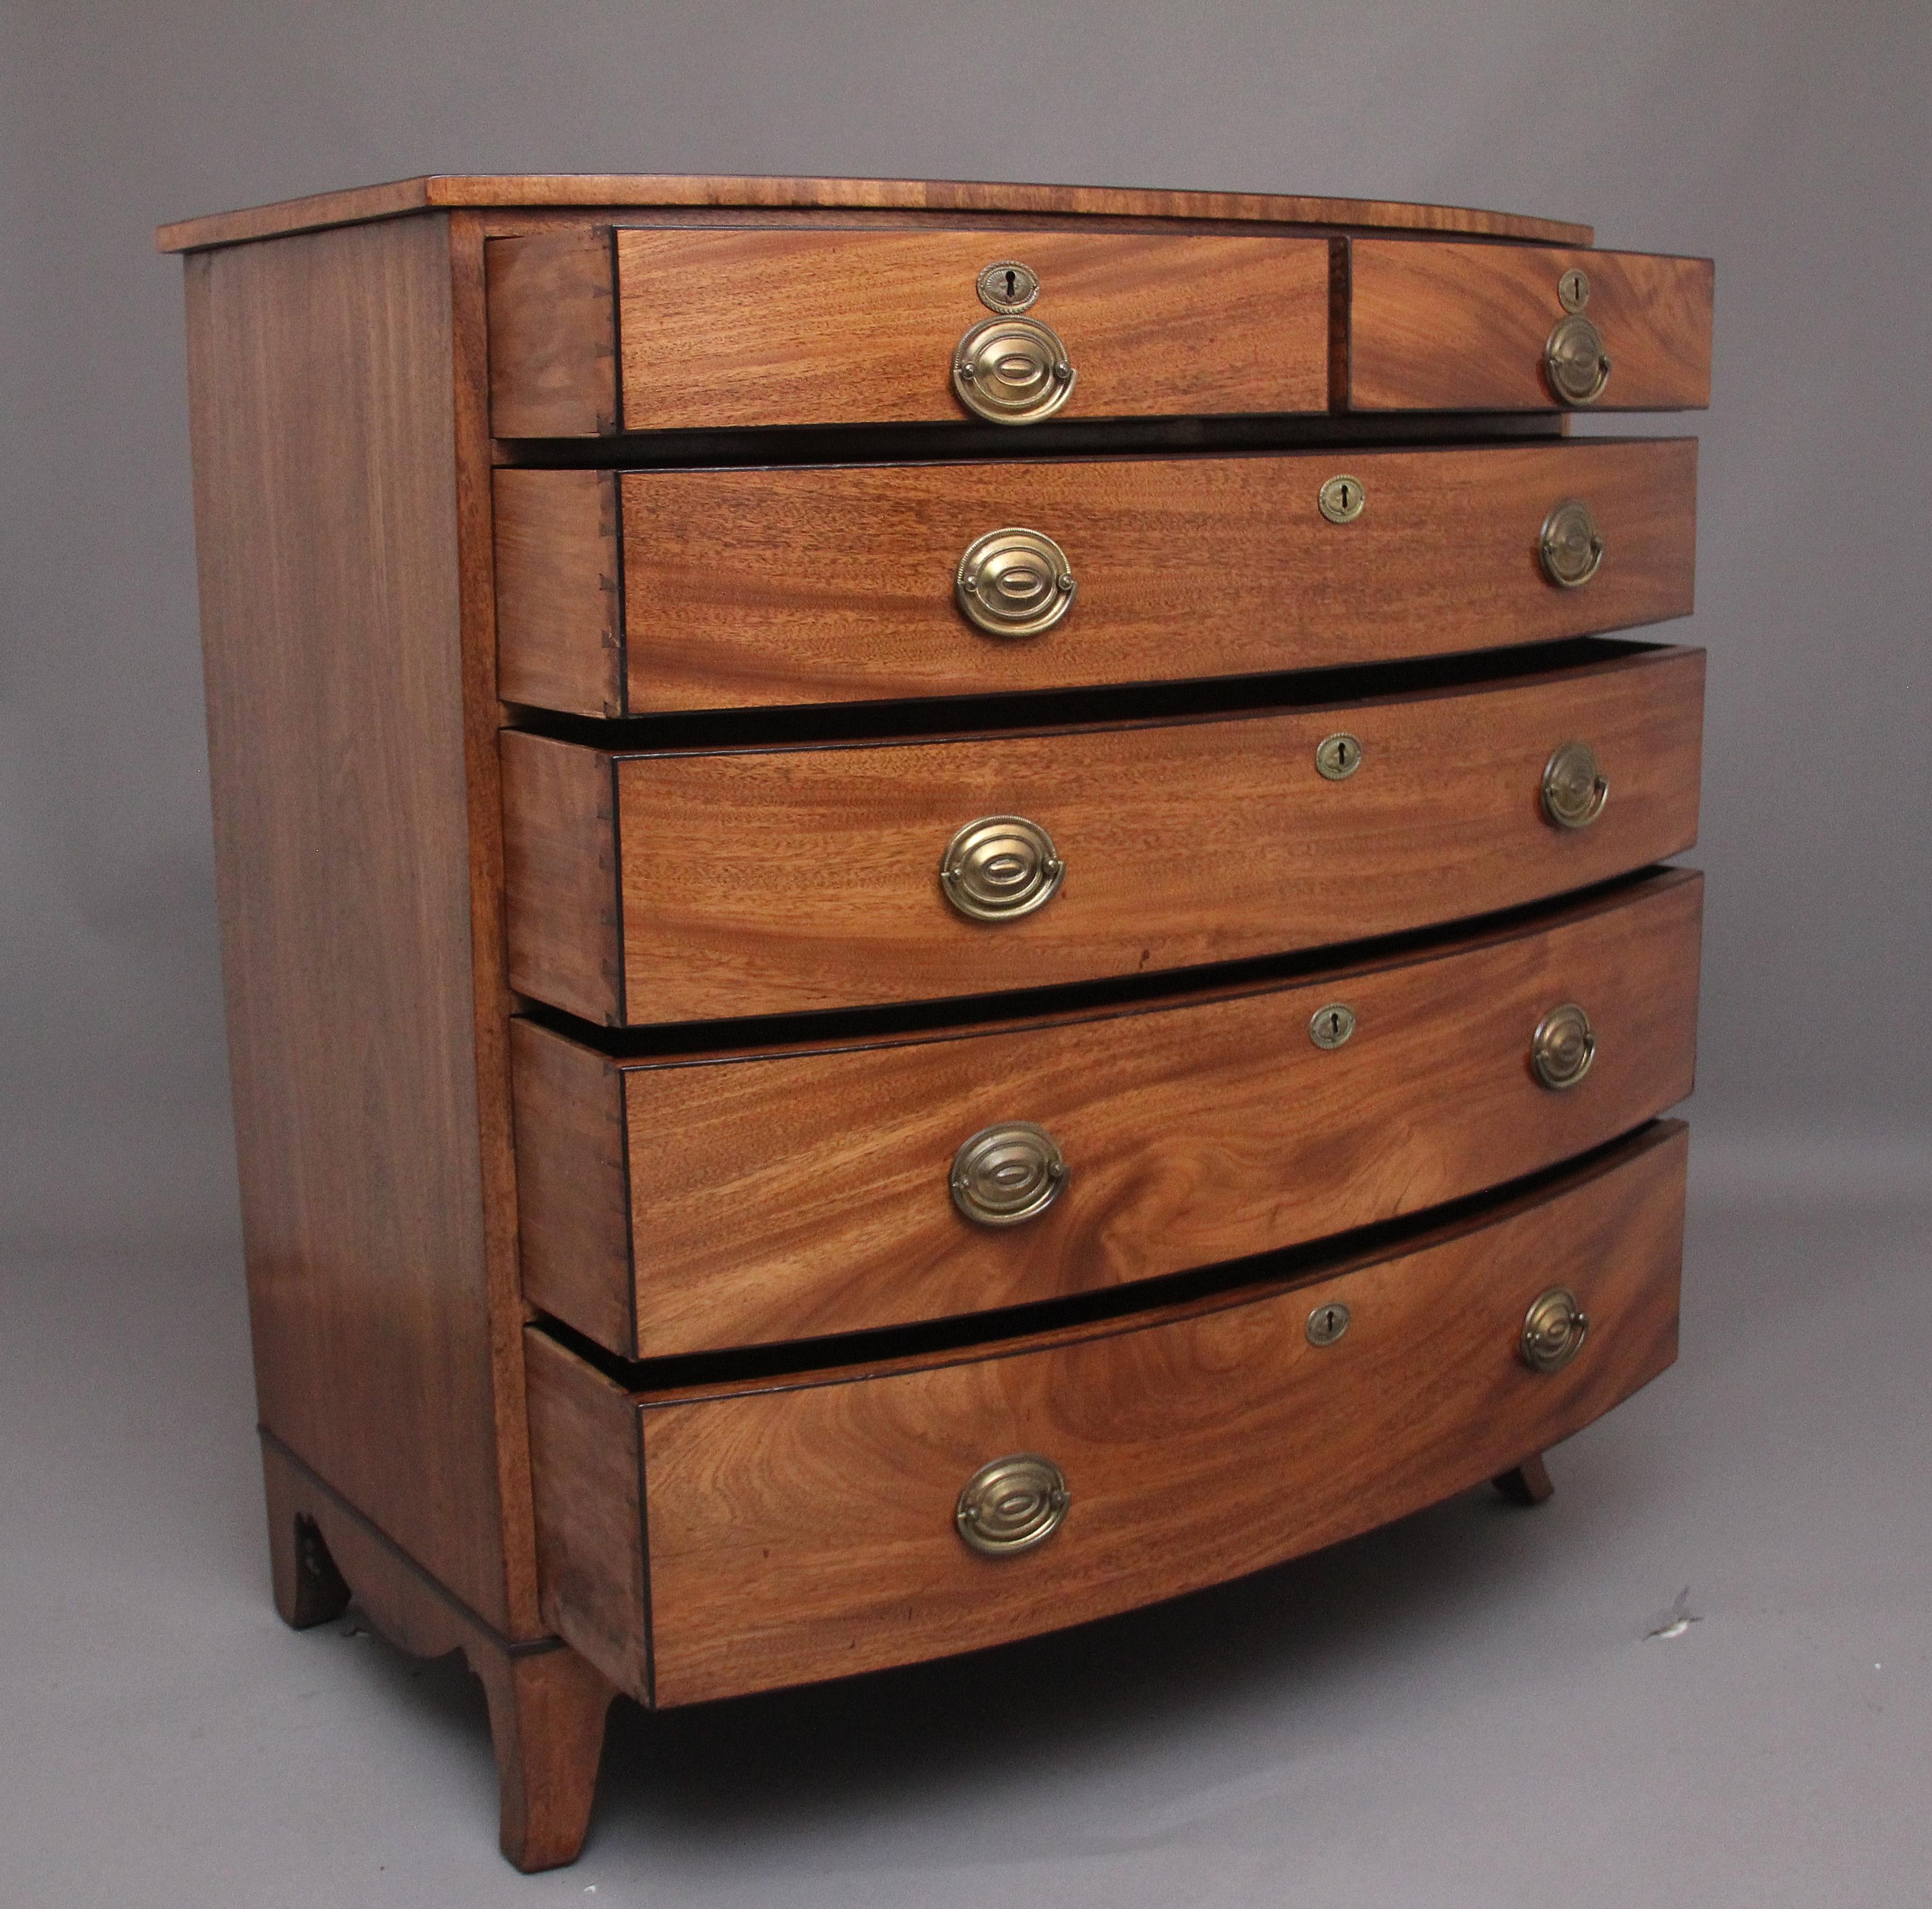 Georgian Superb Quality Early 19th Century Tall Mahogany Bowfront Chest of Drawers For Sale